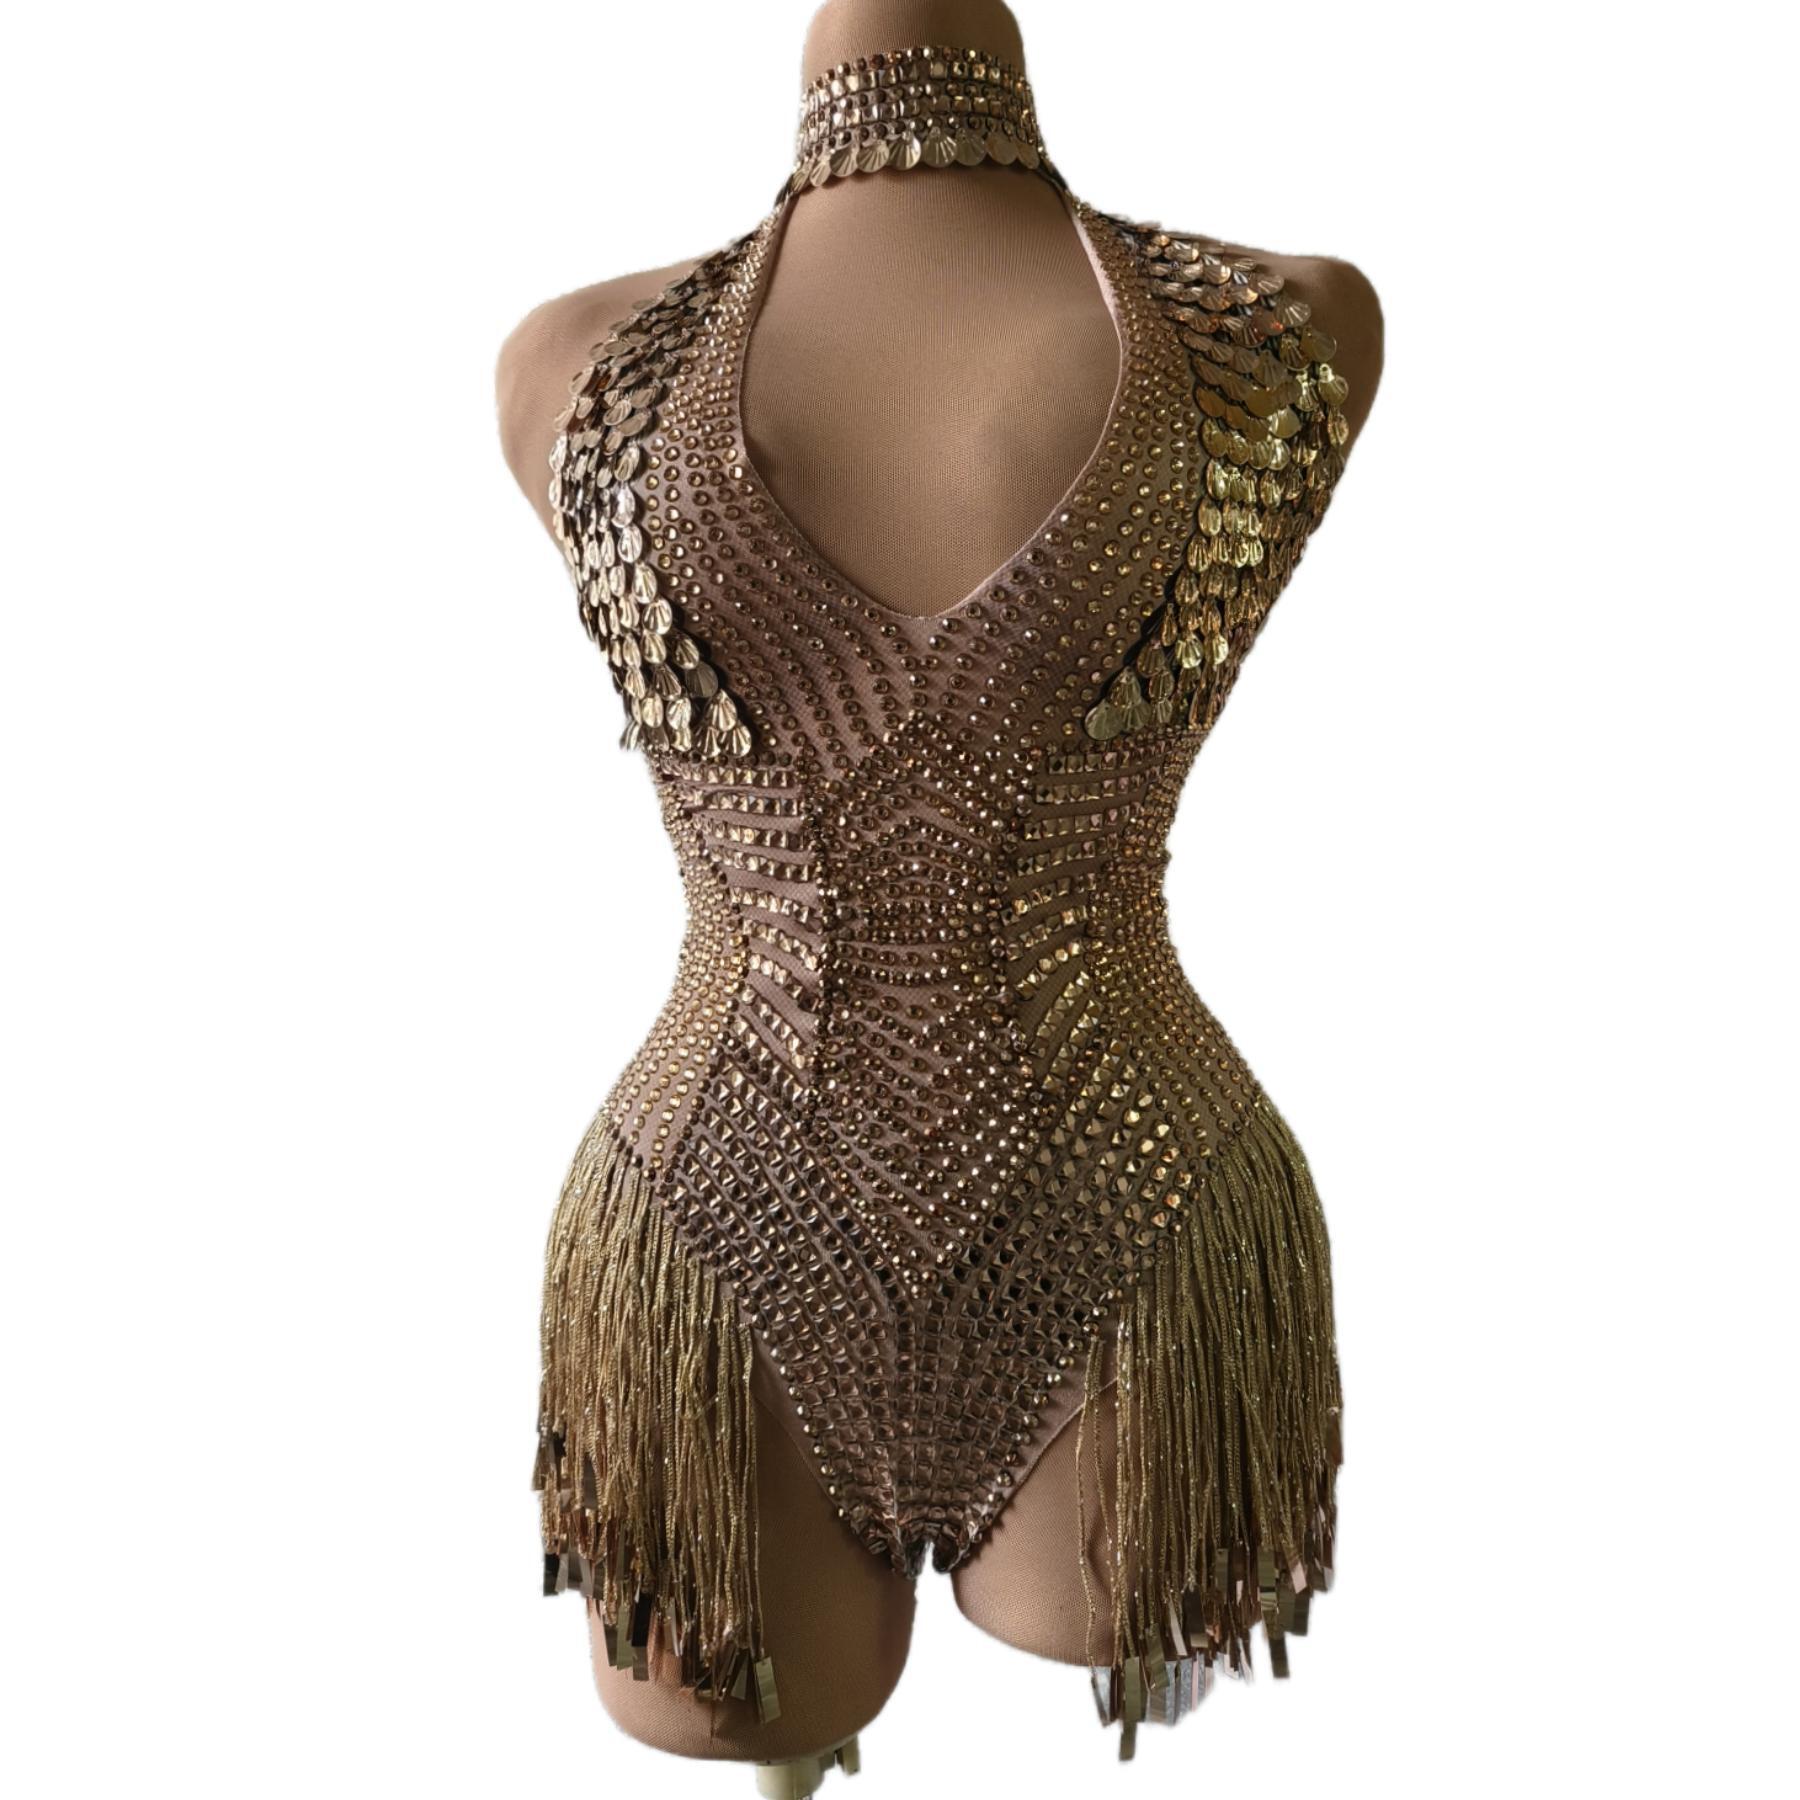 Bright Gold Sequin Crystals tassel Bodysuit Sexy Dance Costume Women Evening Celebrate Crystals Dresses Birthday Collections